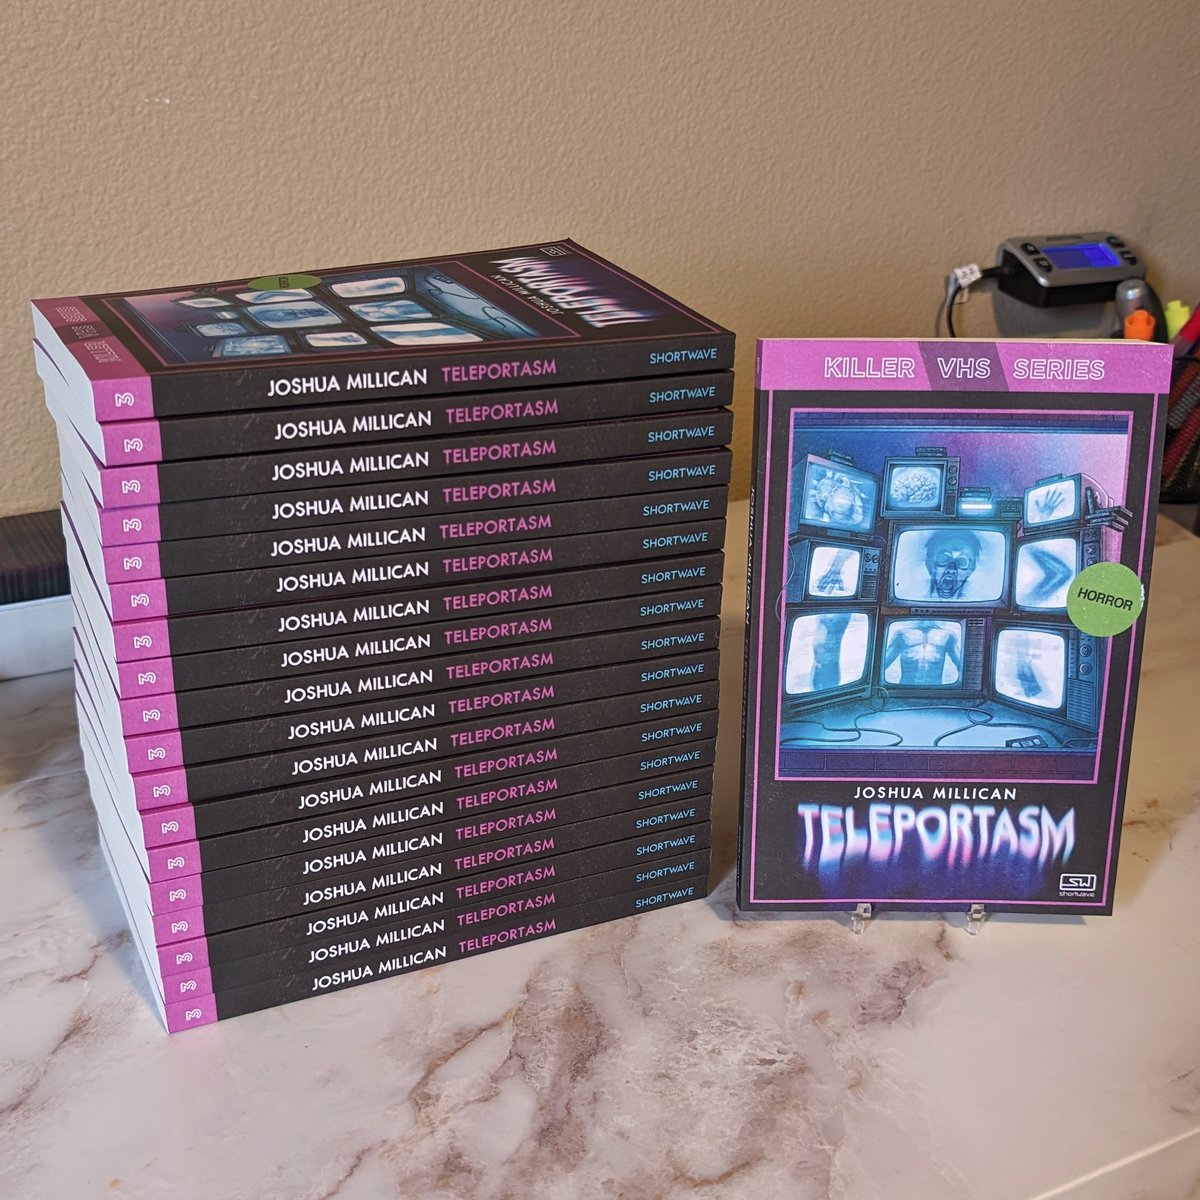 Reviewers! Would you like a print ARC of the third book in our Killer VHS Series, @josh_millican's TELEPORTASM?! We have 25 copies up for grabs. If you are selected, we will alert you by this Friday evening. Please apply here: forms.gle/RW5DpPSgRL5kLZ…